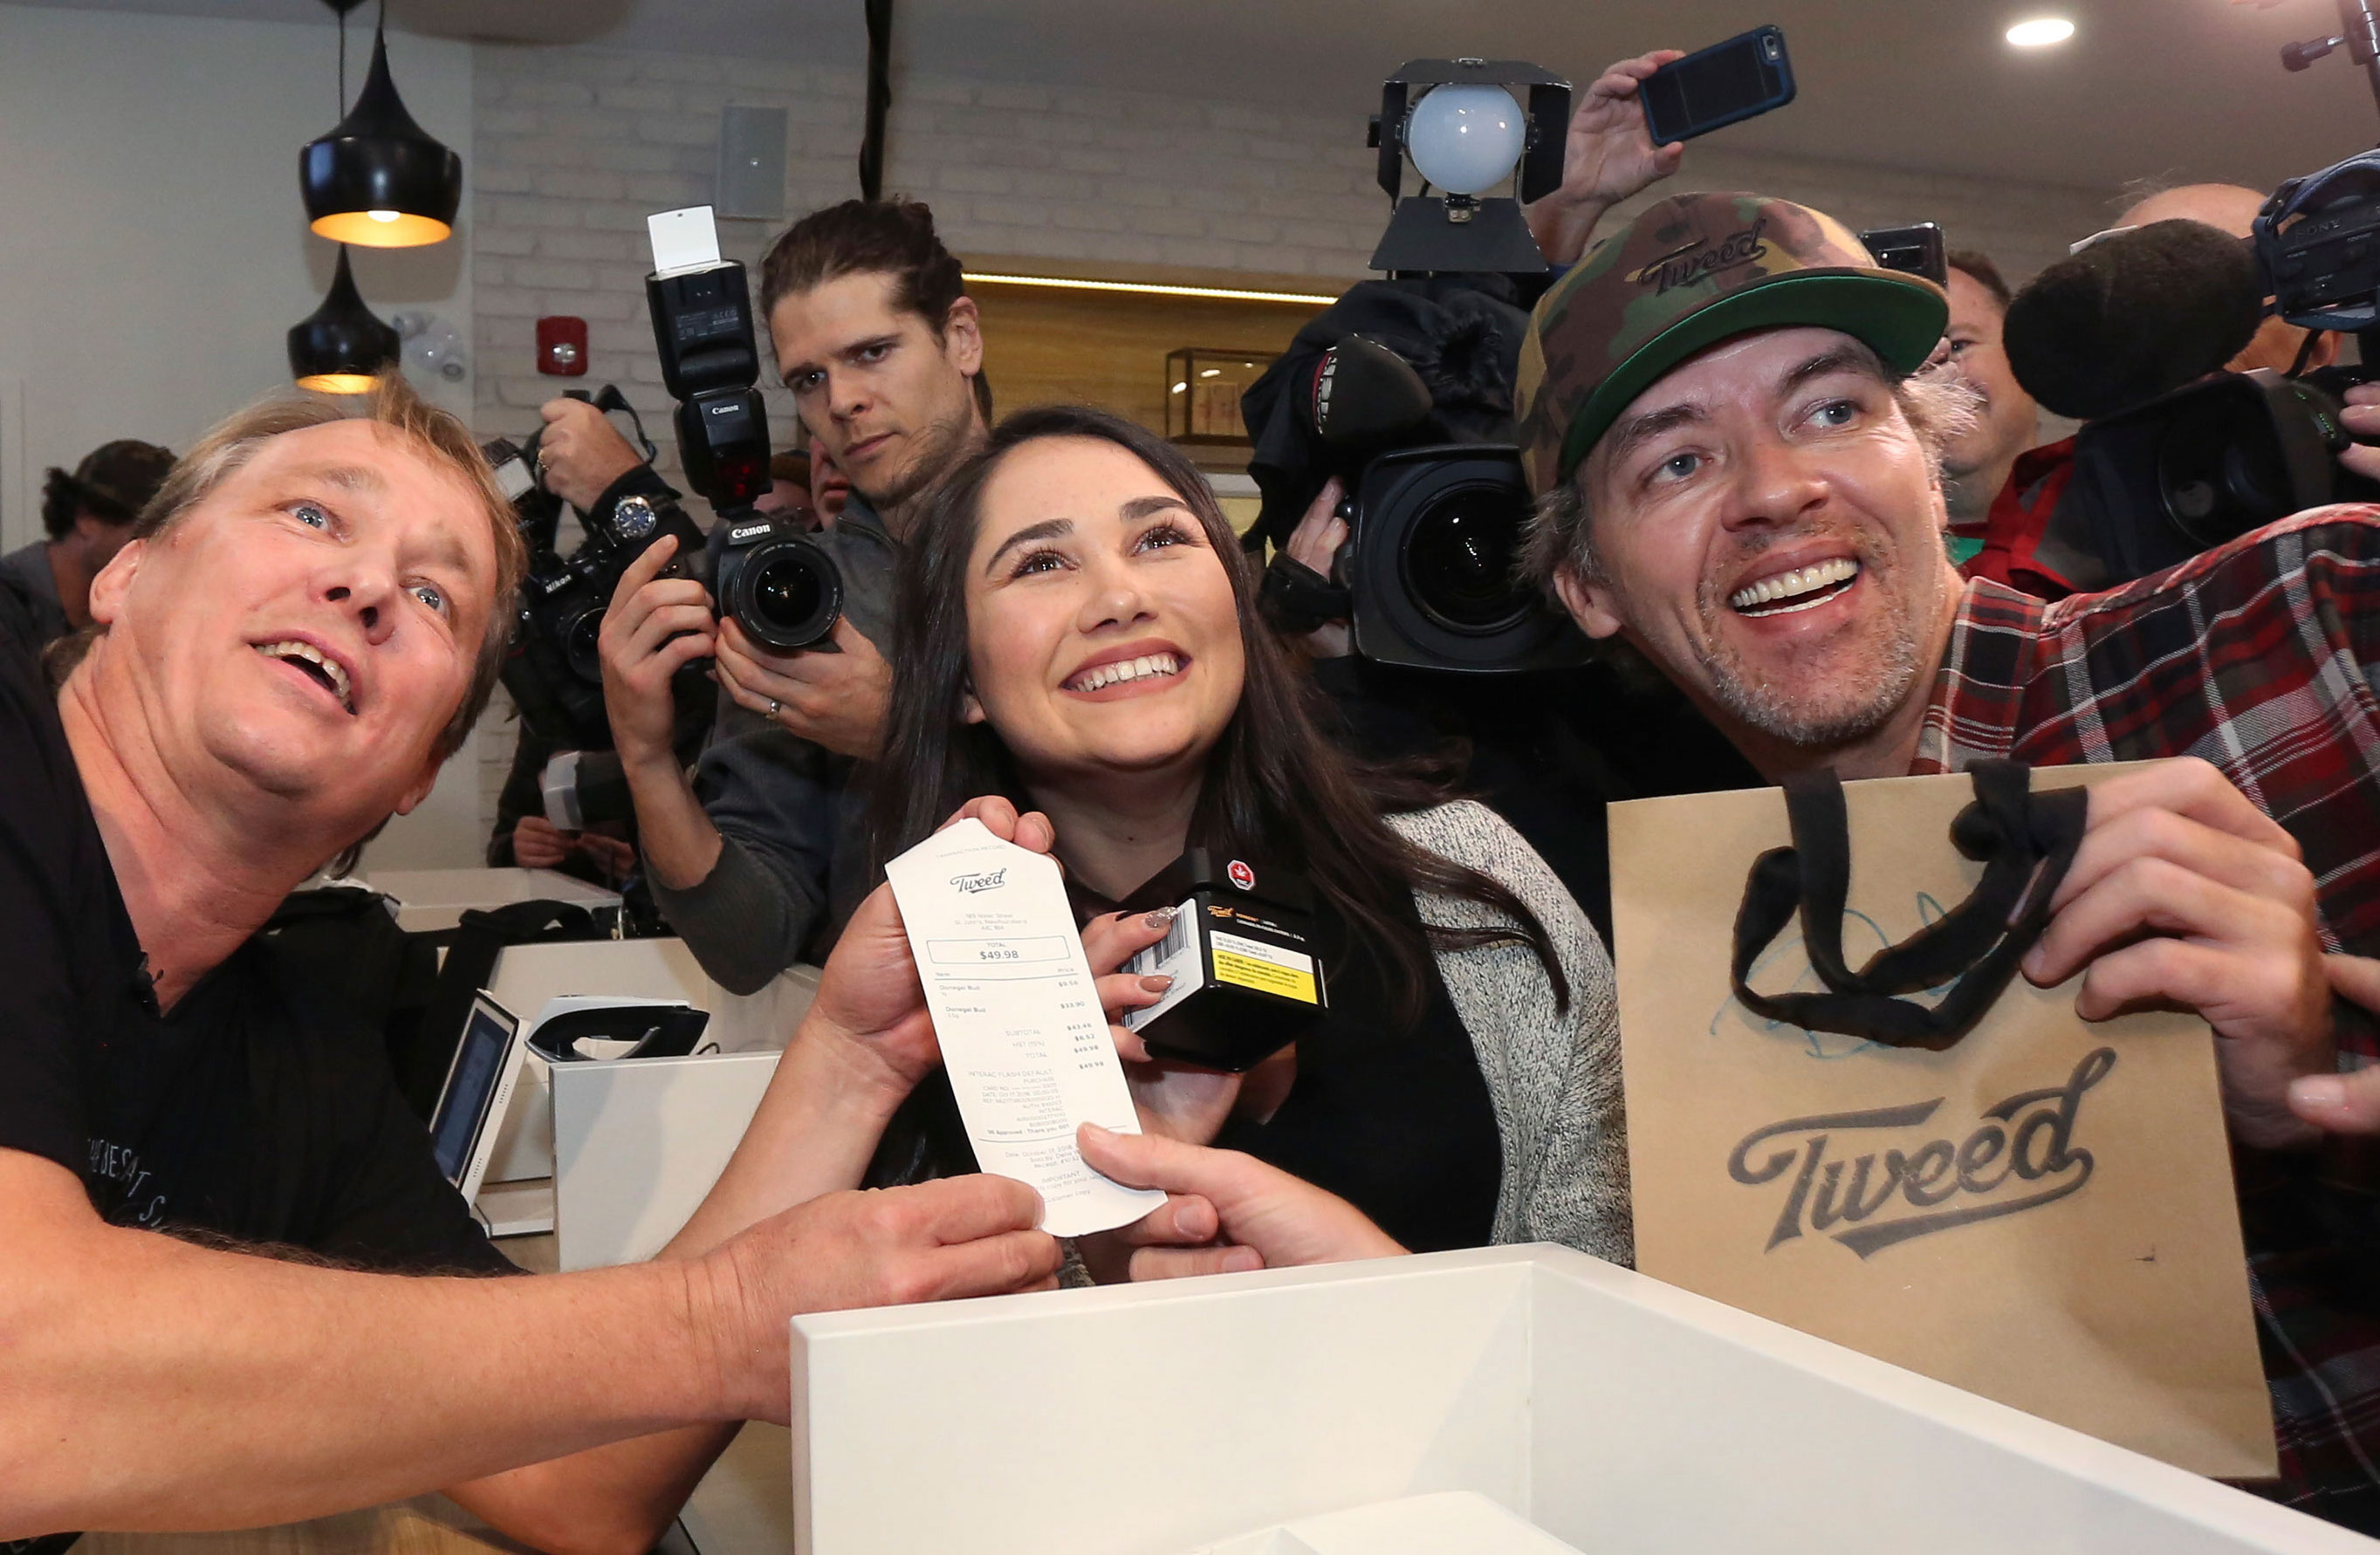 Canopy Growth CEO Bruce Linton, left to right, poses with the receipt for the first legal cannabis for recreation use sold in Canada to Nikki Rose and Ian Power at the Tweed shop on Water Street in St. John's N.L. at 12:01 am NDT on Wednesday. 